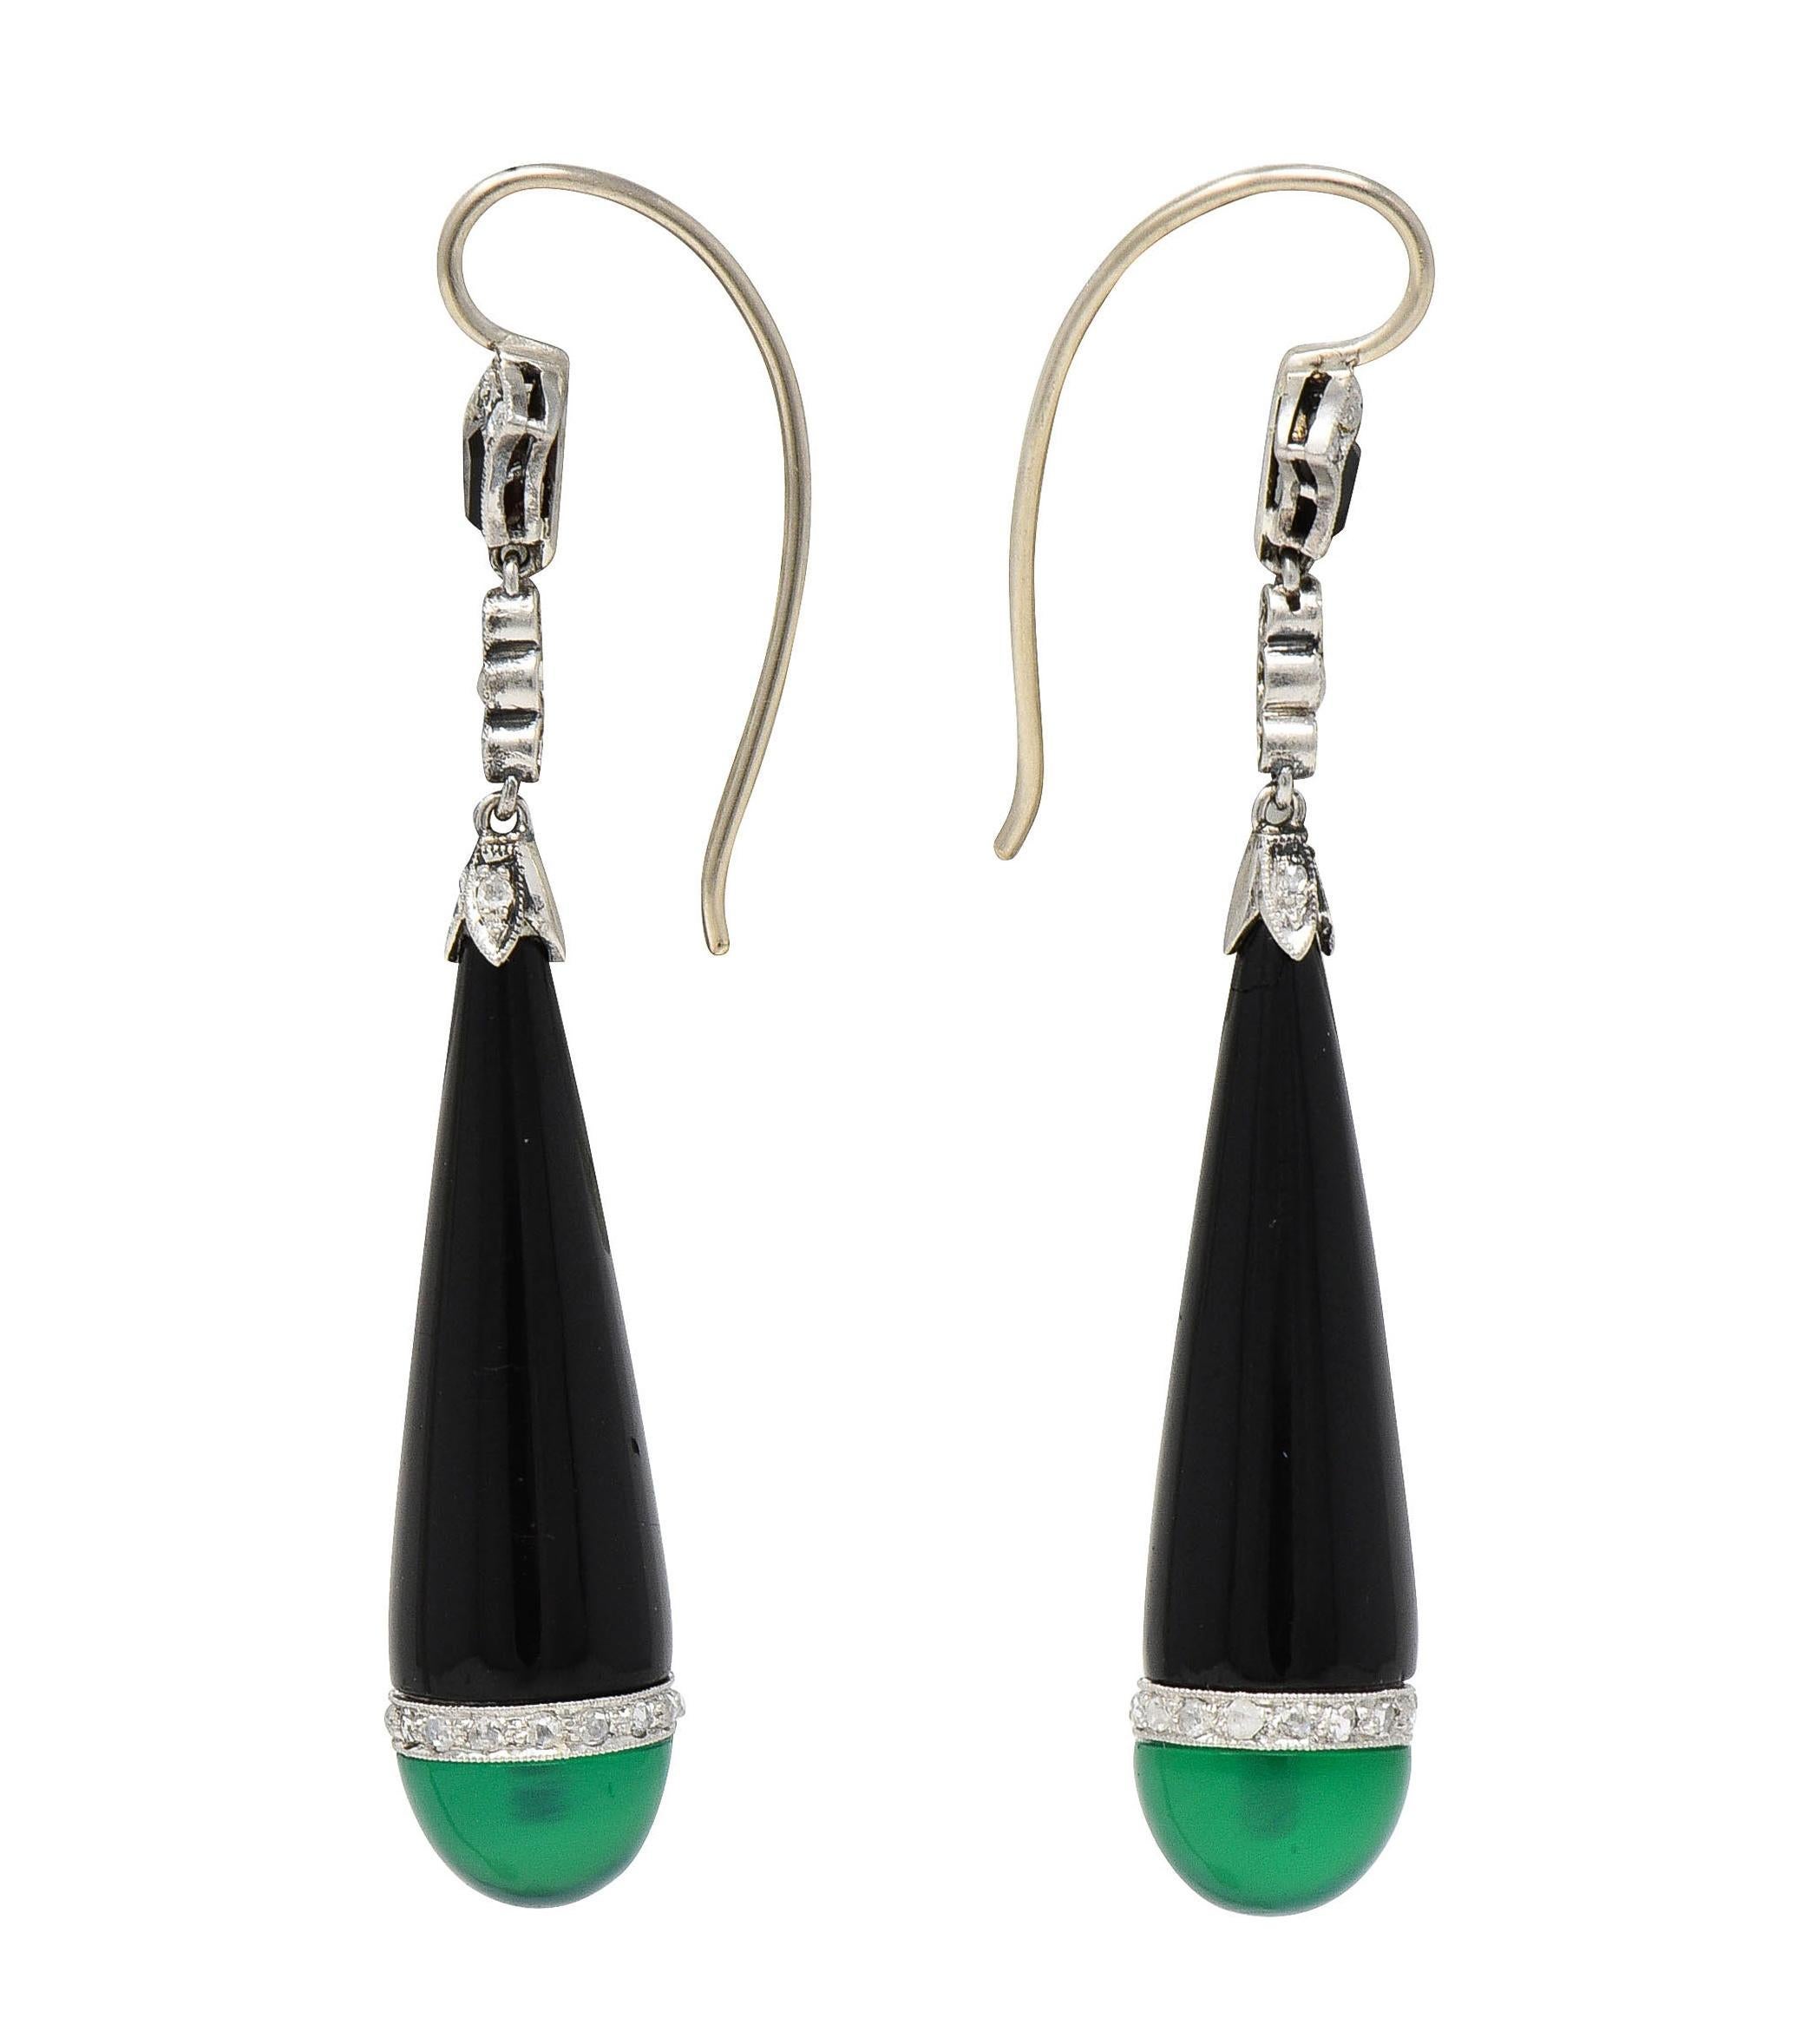 Designed as spiculum-shaped drop earrings suspending from fanning lotus motif surmounts
Surmounts and drops are partially comprised of inlaid and carved onyx 
Semi-opaque to opaque dark reddish black to black in color
Drops terminate with 8.0 mm